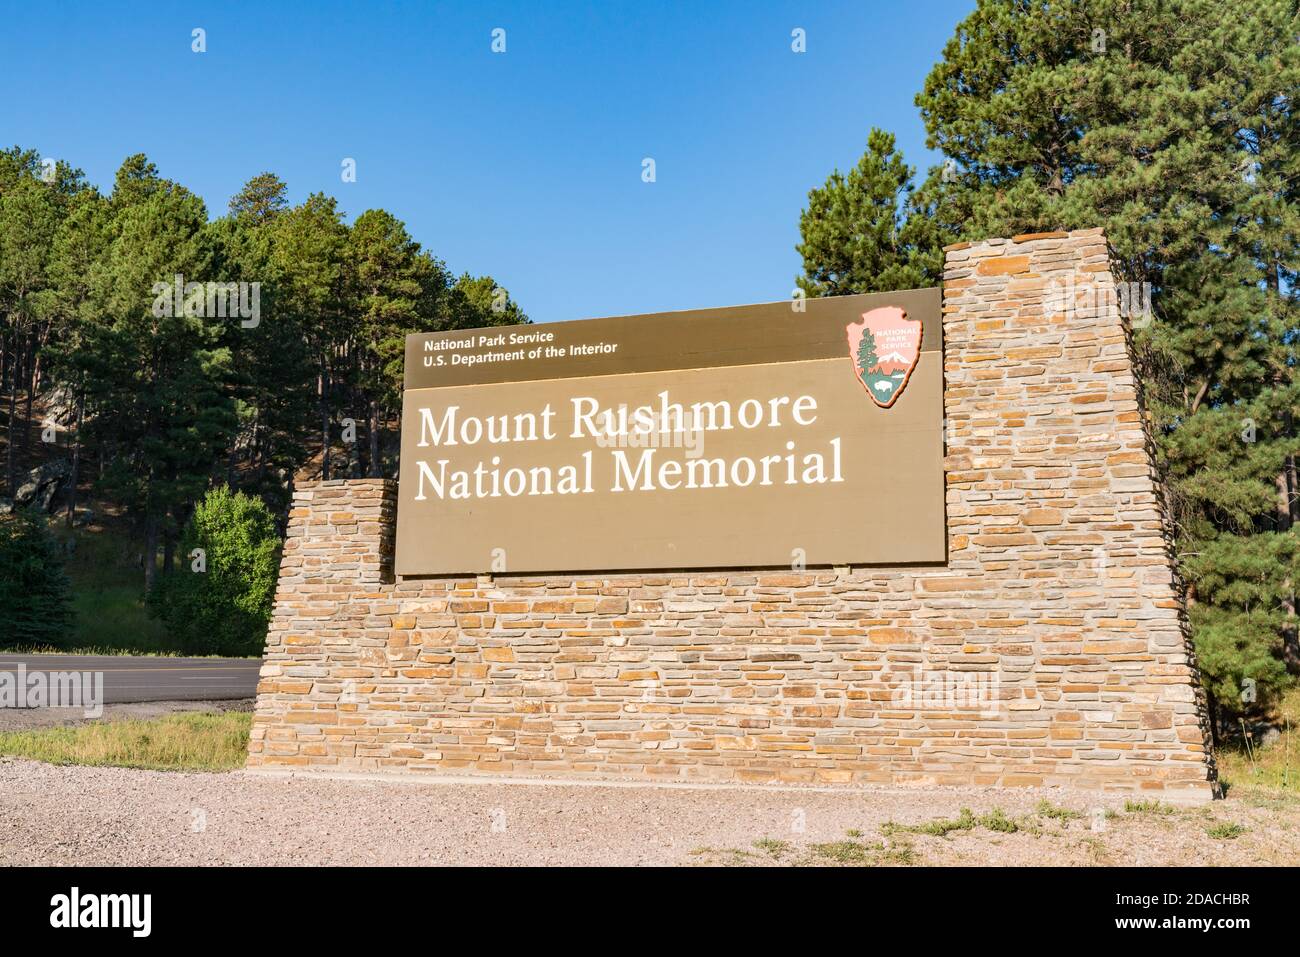 Entrance sign to Mount Rushmore National Memorial in the Black Hills of South Dakota Stock Photo